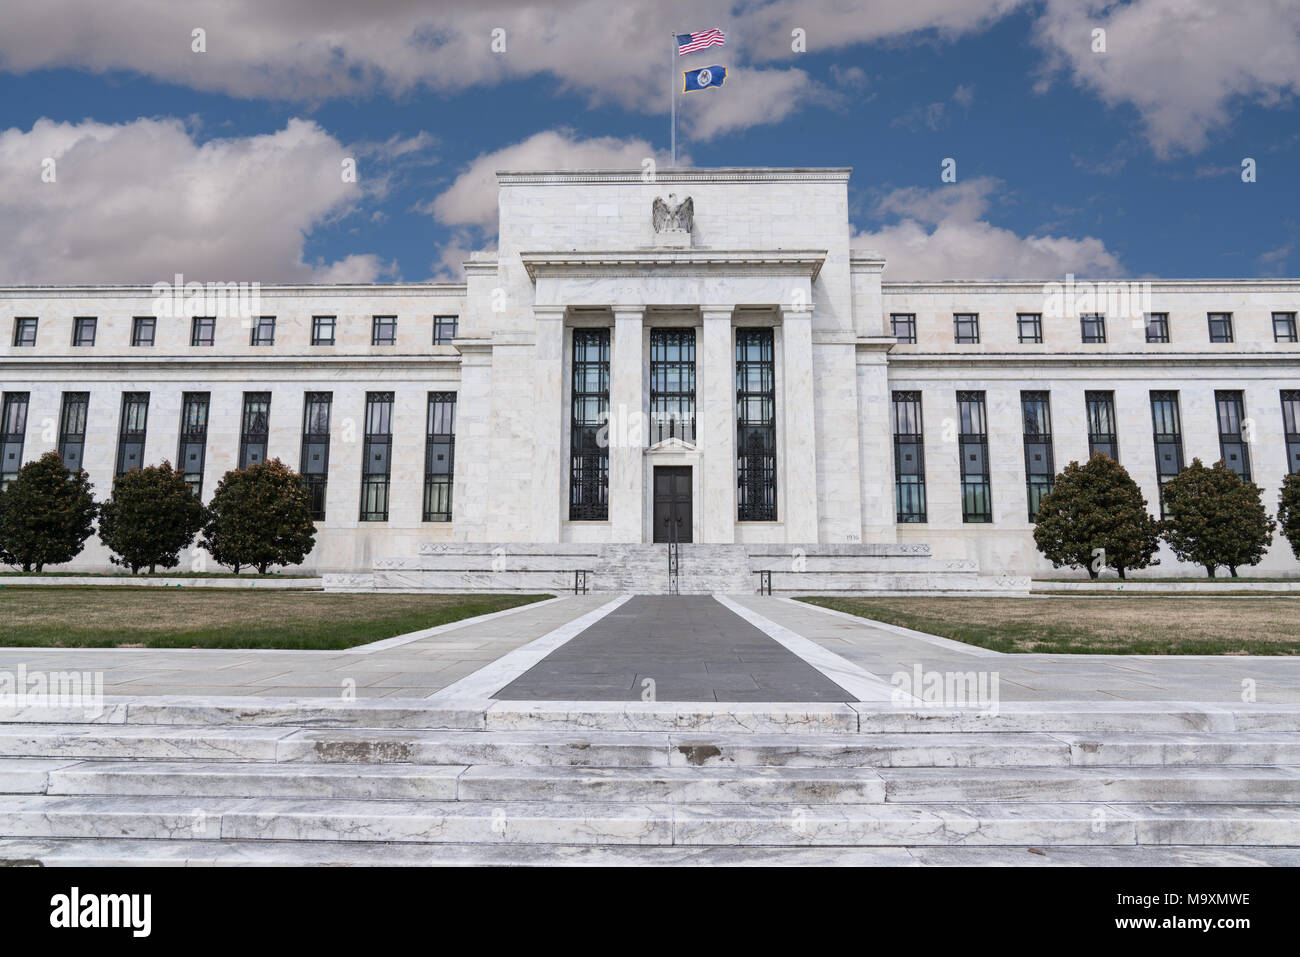 United States Federal Reserve Building in Washington DC Stockfoto